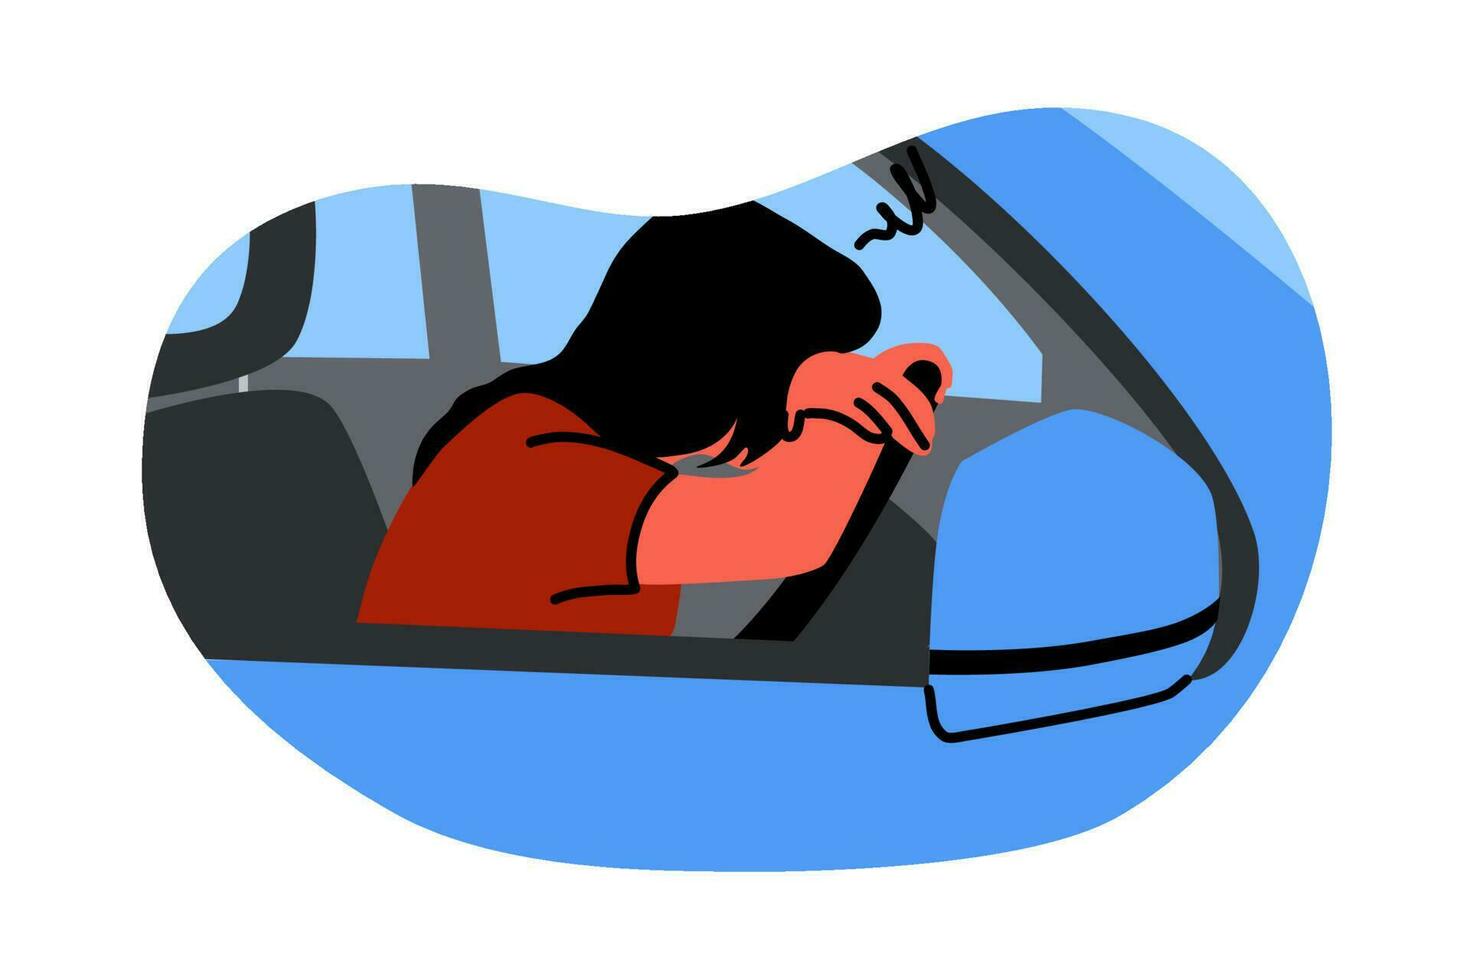 Mental stress, frustration, depression, fatigue, sleep concept. Young unhappy depressed stressful frustrated woman driver character sleeping on steering wheel. Annoyance about stucking in car traffic. vector